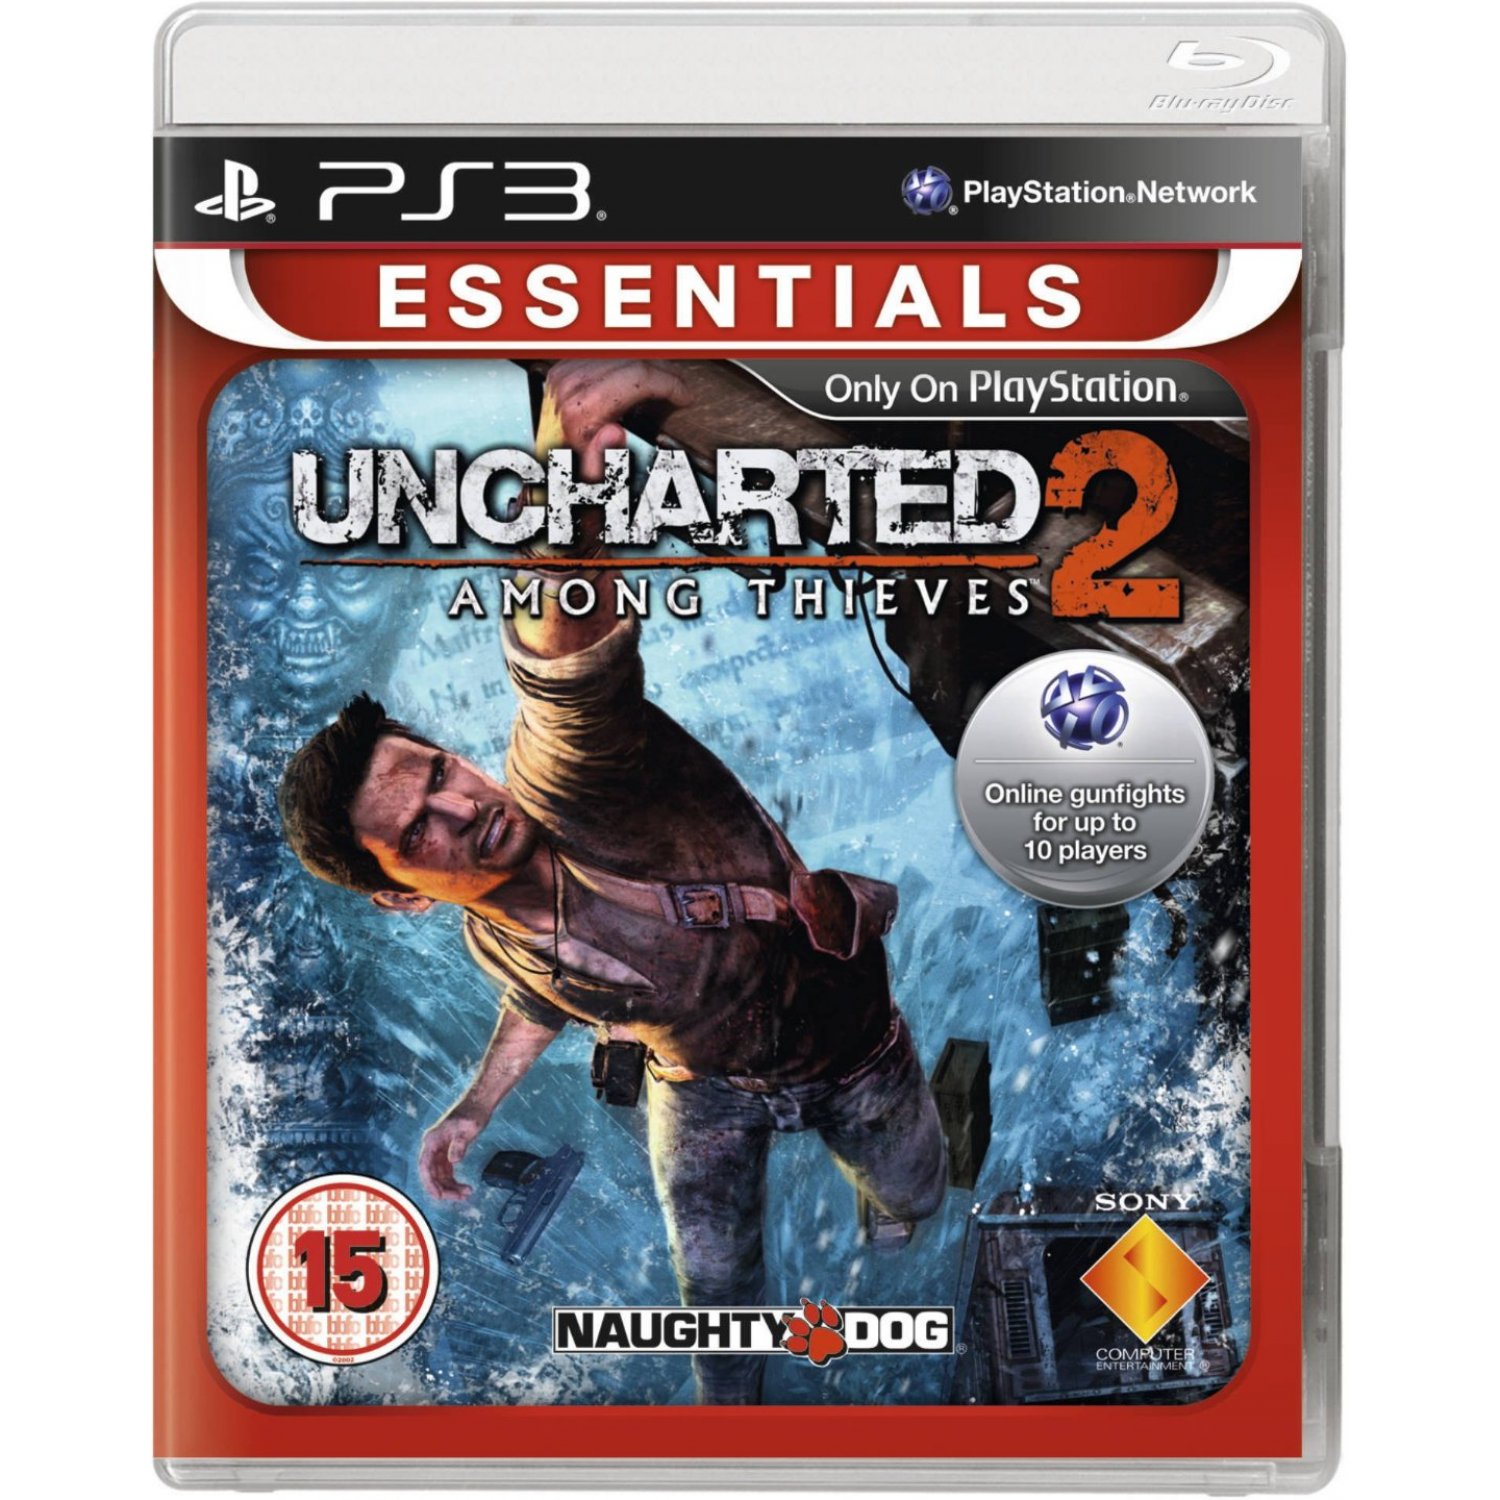 Игры на 2 на плейстейшен 3. Uncharted 2 ps3. Uncharted 2 among Thieves ps3 обложка. PLAYSTATION 3. Игры на плейстейшен 3.